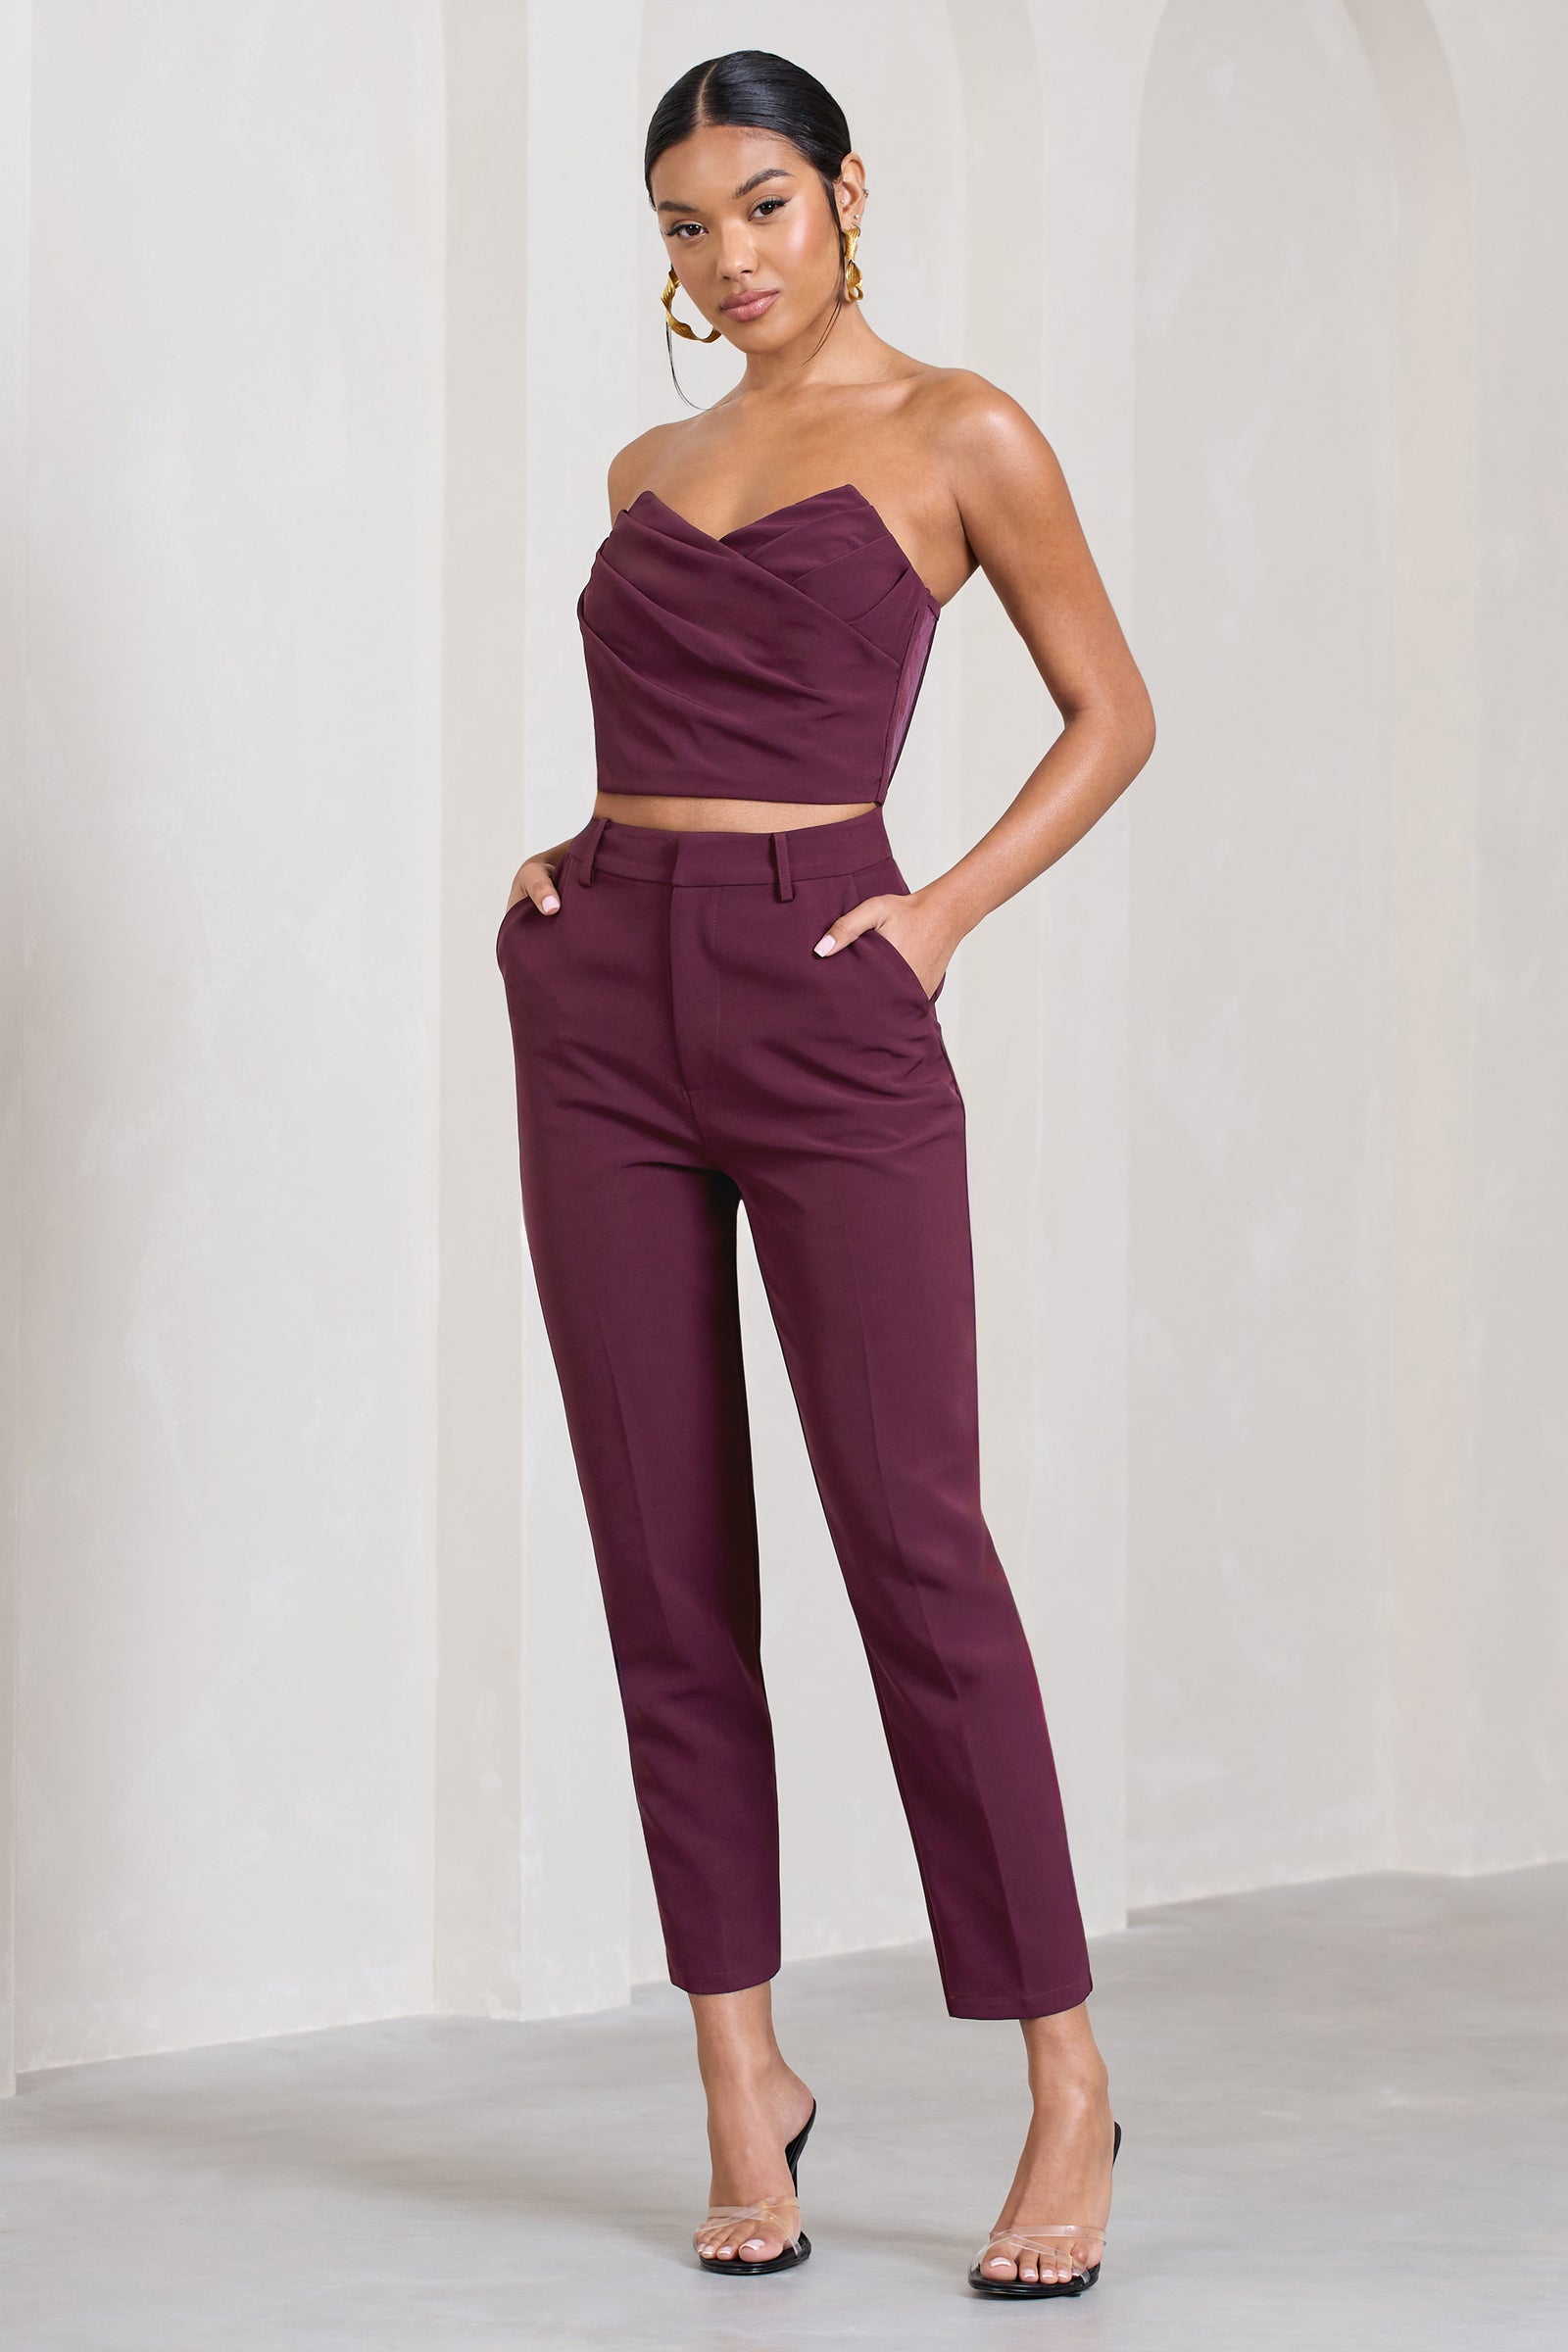 Dream Beauty Fashion Regular Fit Women Maroon Trousers - Buy Dream Beauty  Fashion Regular Fit Women Maroon Trousers Online at Best Prices in India |  Flipkart.com